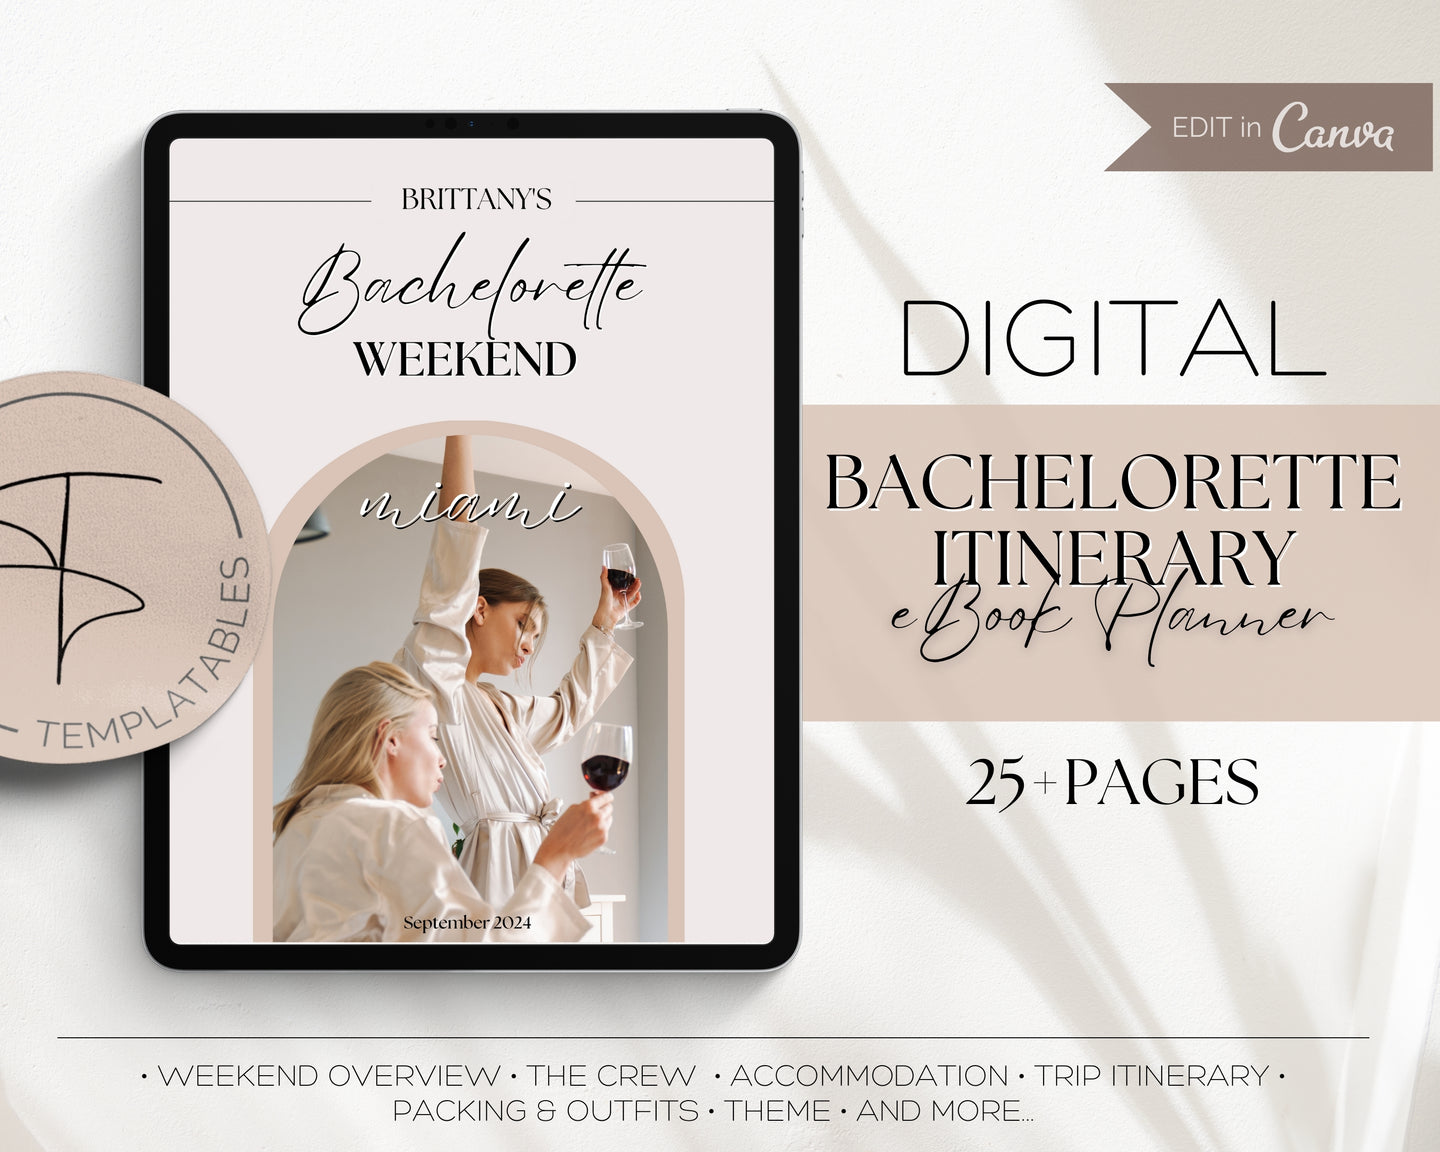 Bachelorette Itinerary Template | eBook Itinerary for Weekend Girls Trip away for hen party's & bachelorettes!